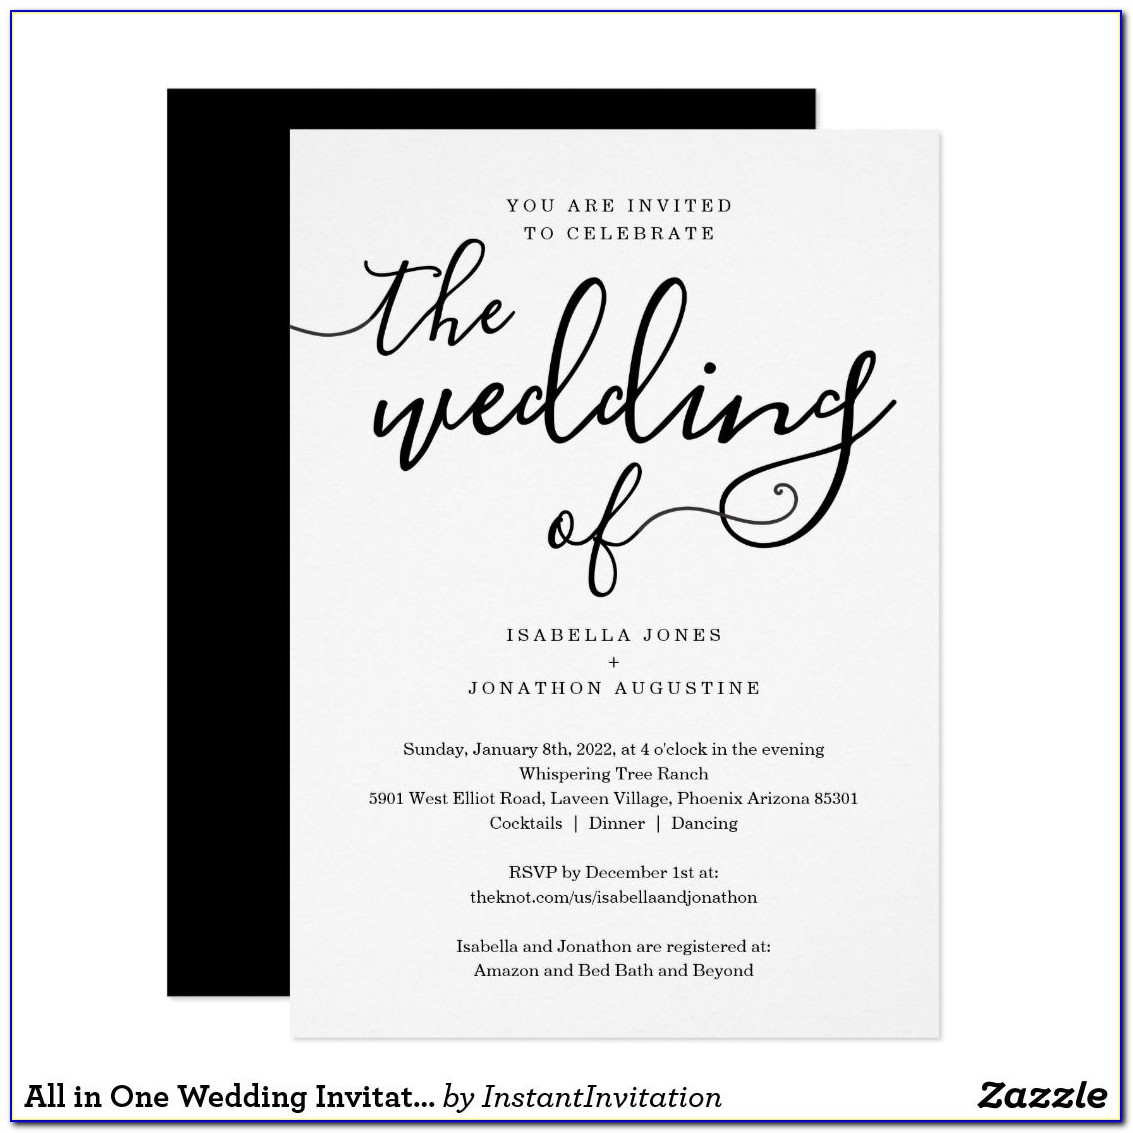 Wedding Invitations And Rsvp Cards All In One Cheap